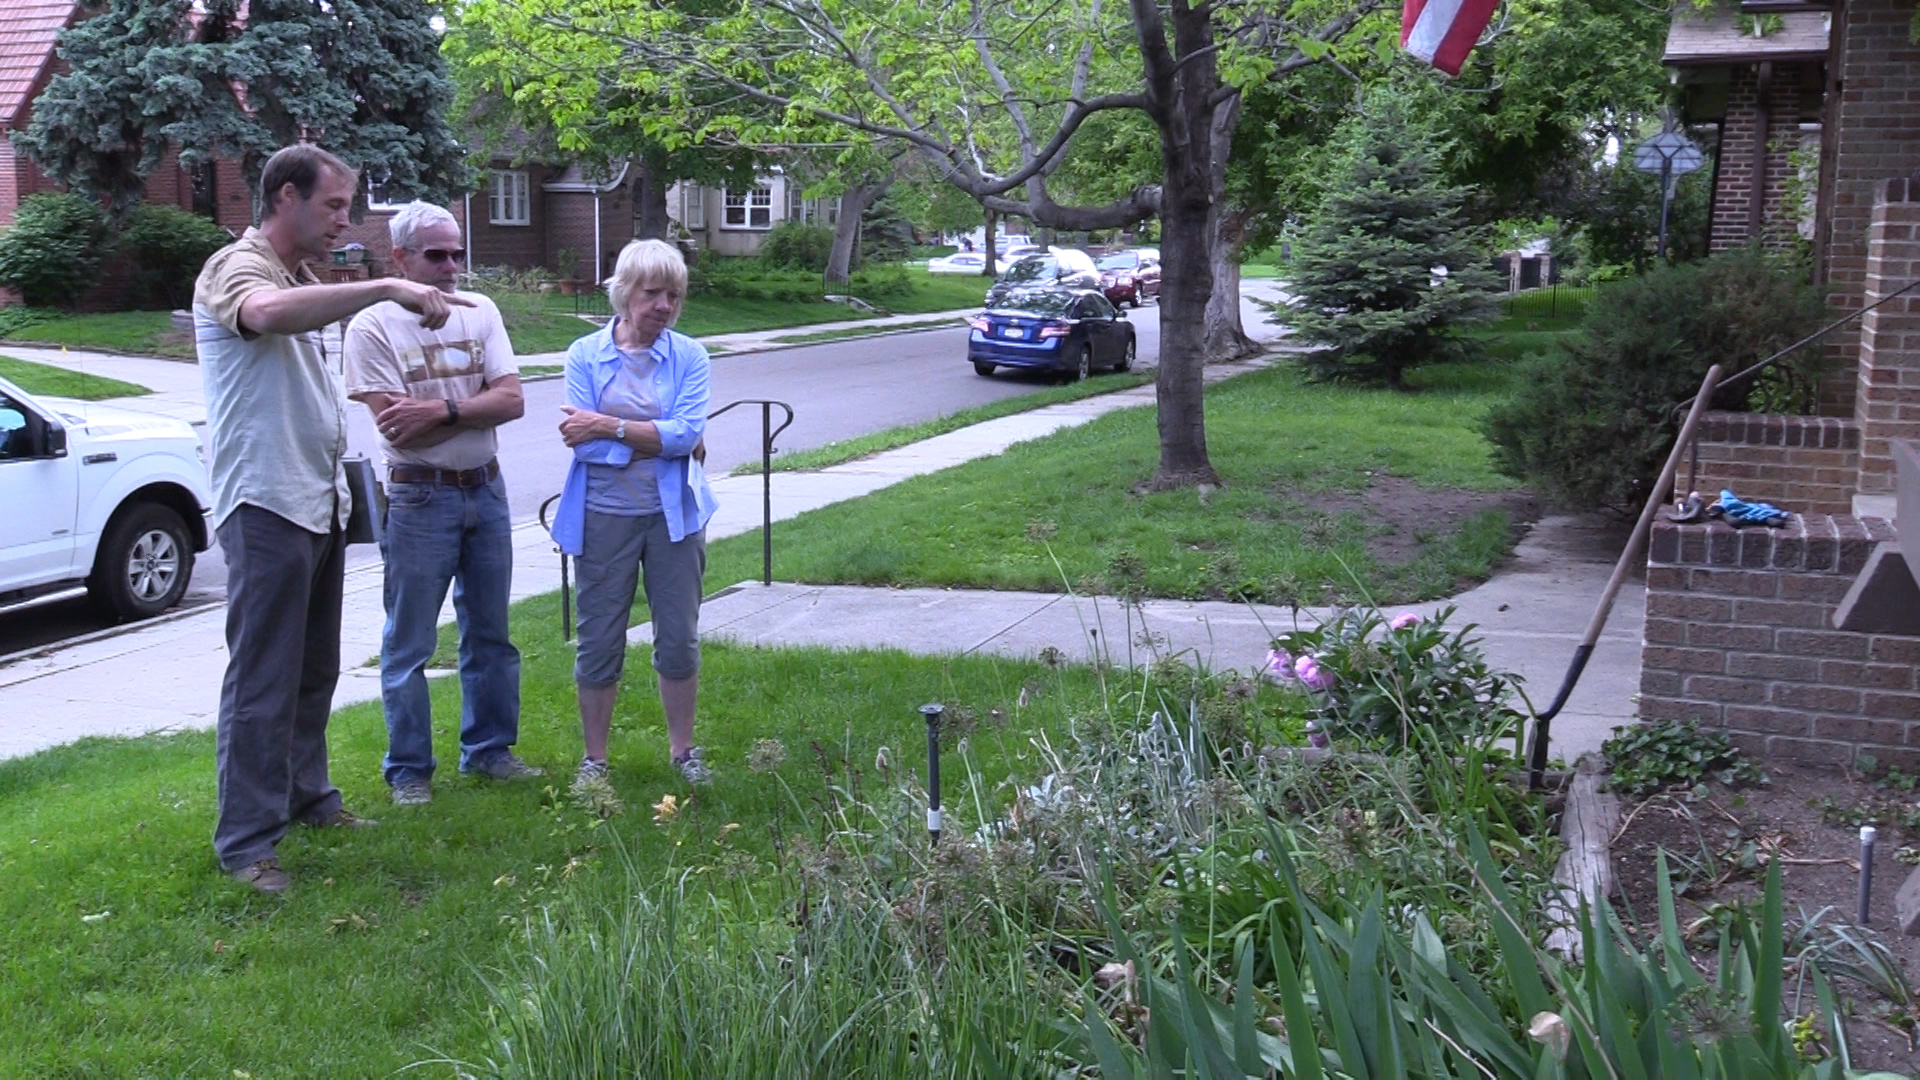 Landscape designer Curtis Manning (left), discusses landscape options in the front yard with Kim Hartsen (middle), and April Montgomery (right).